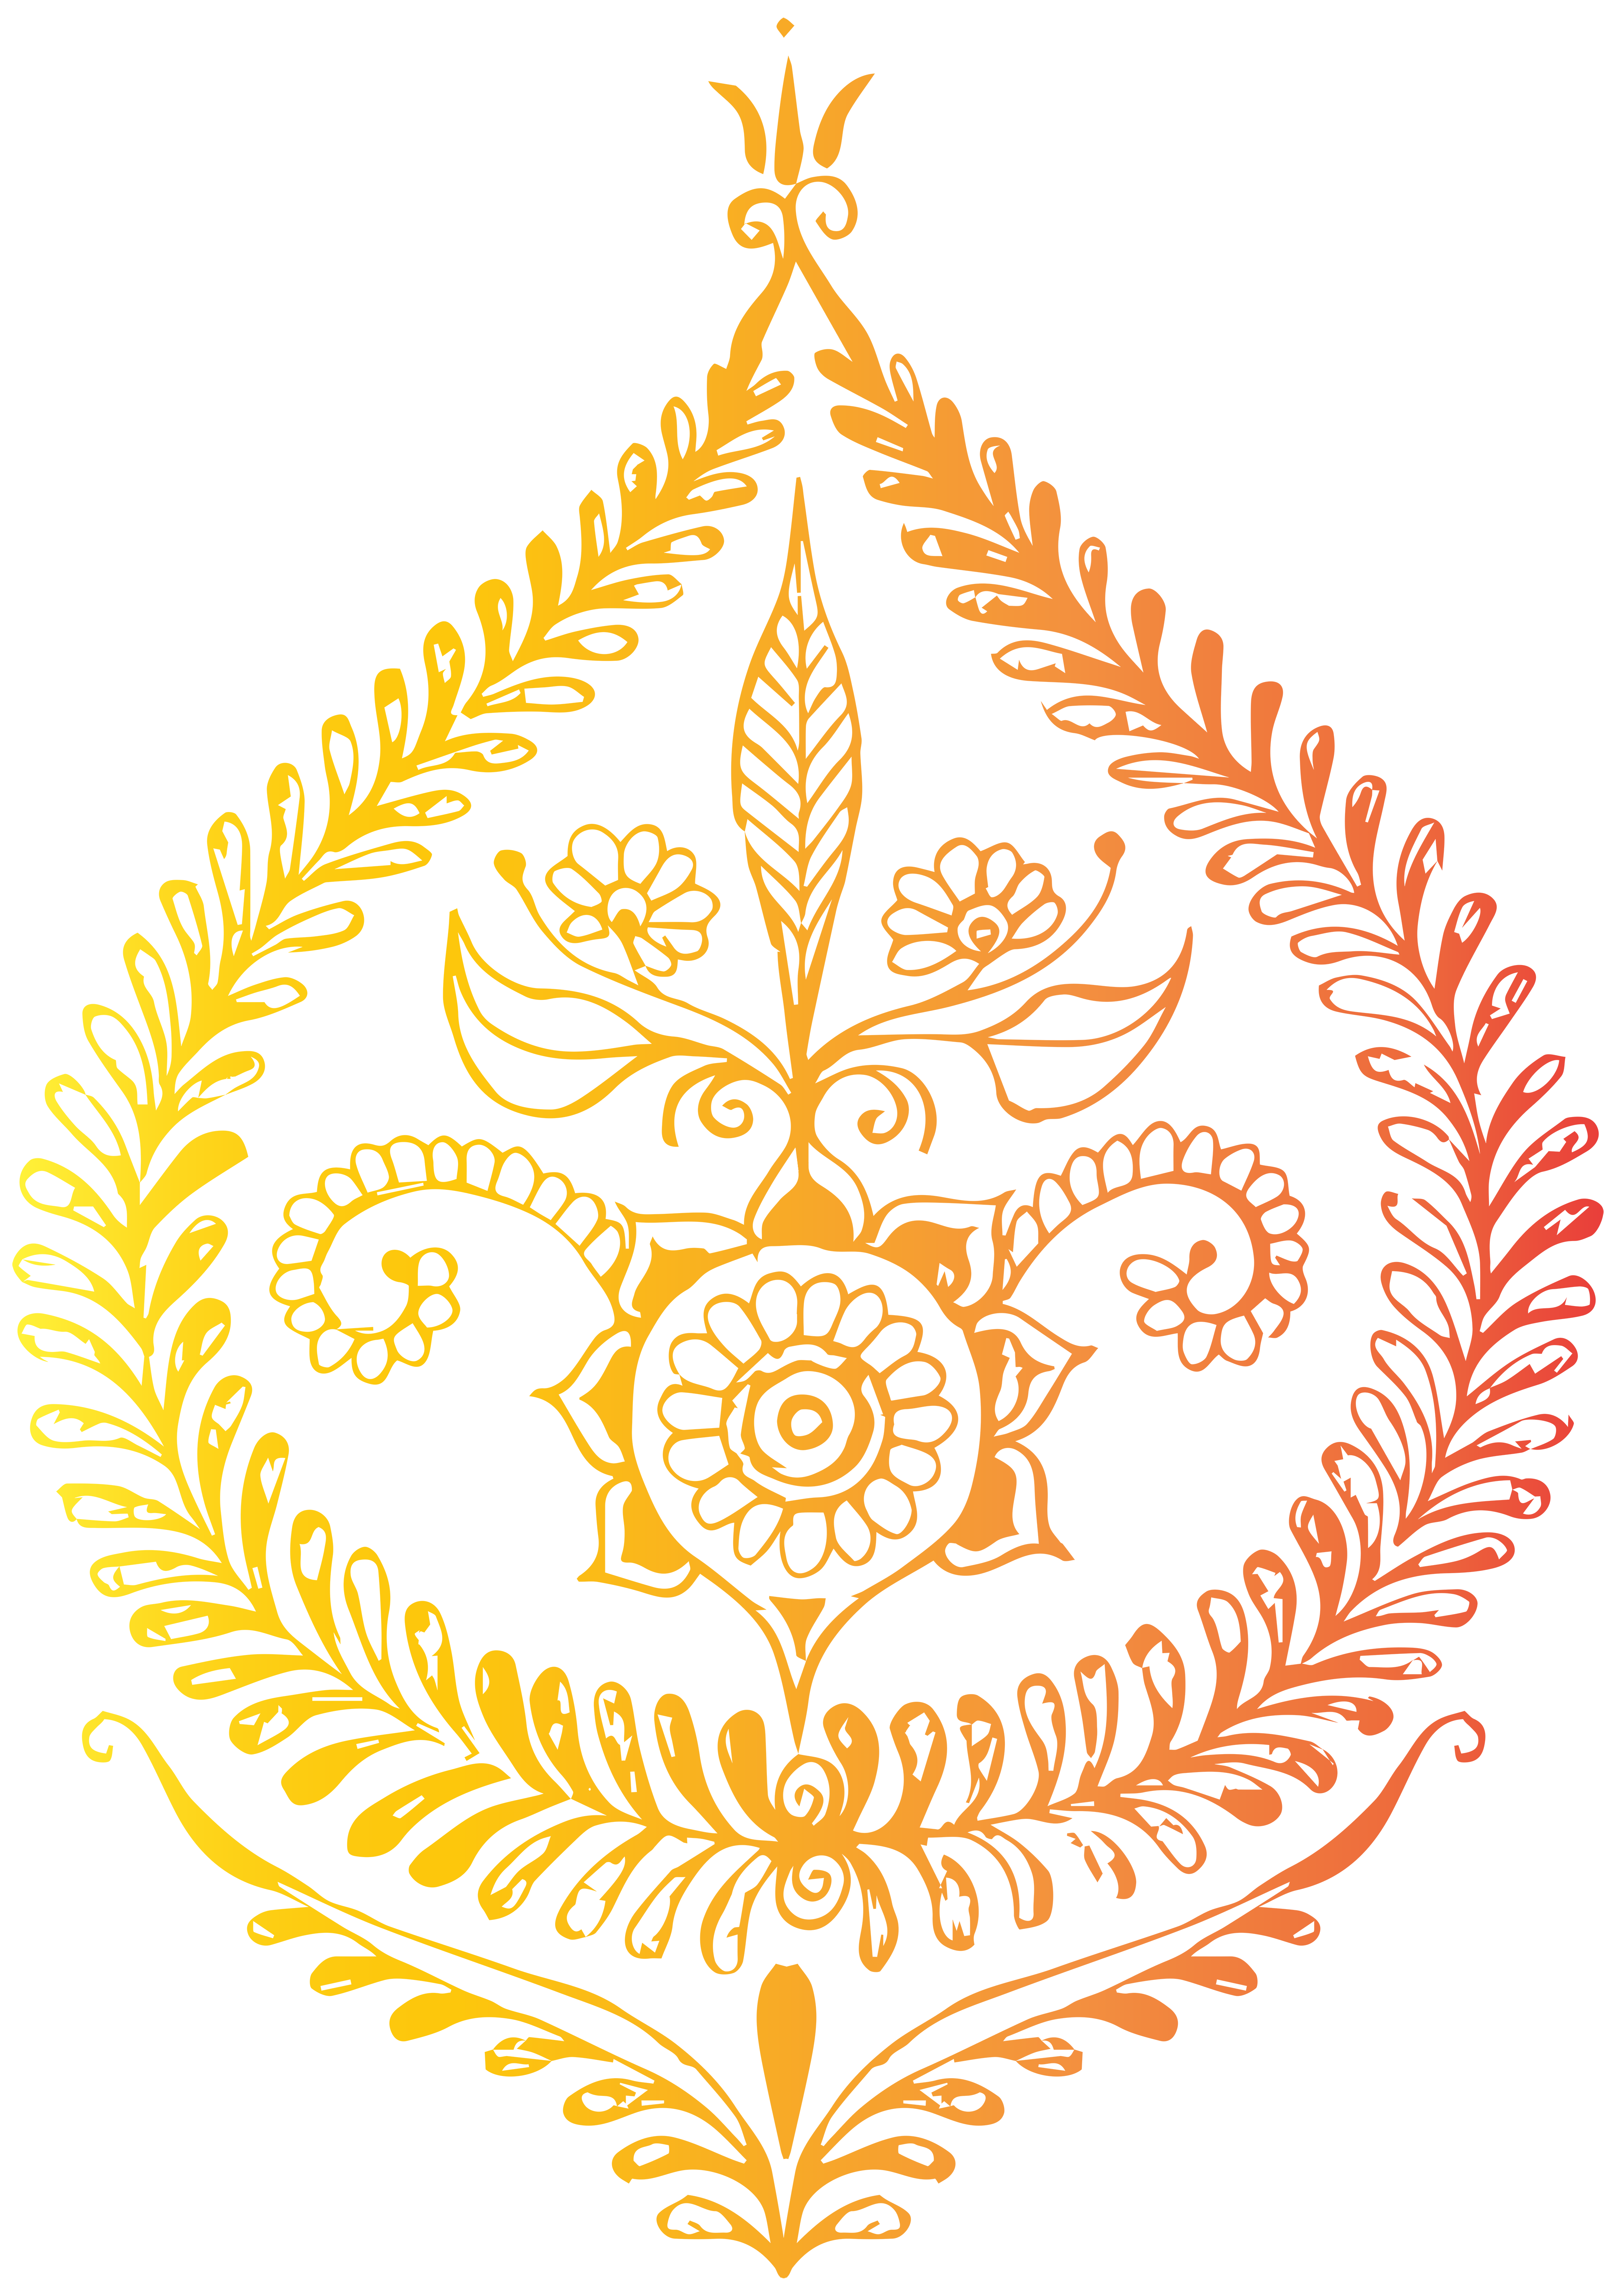 India Decoration Free PNG Clip Art Image.